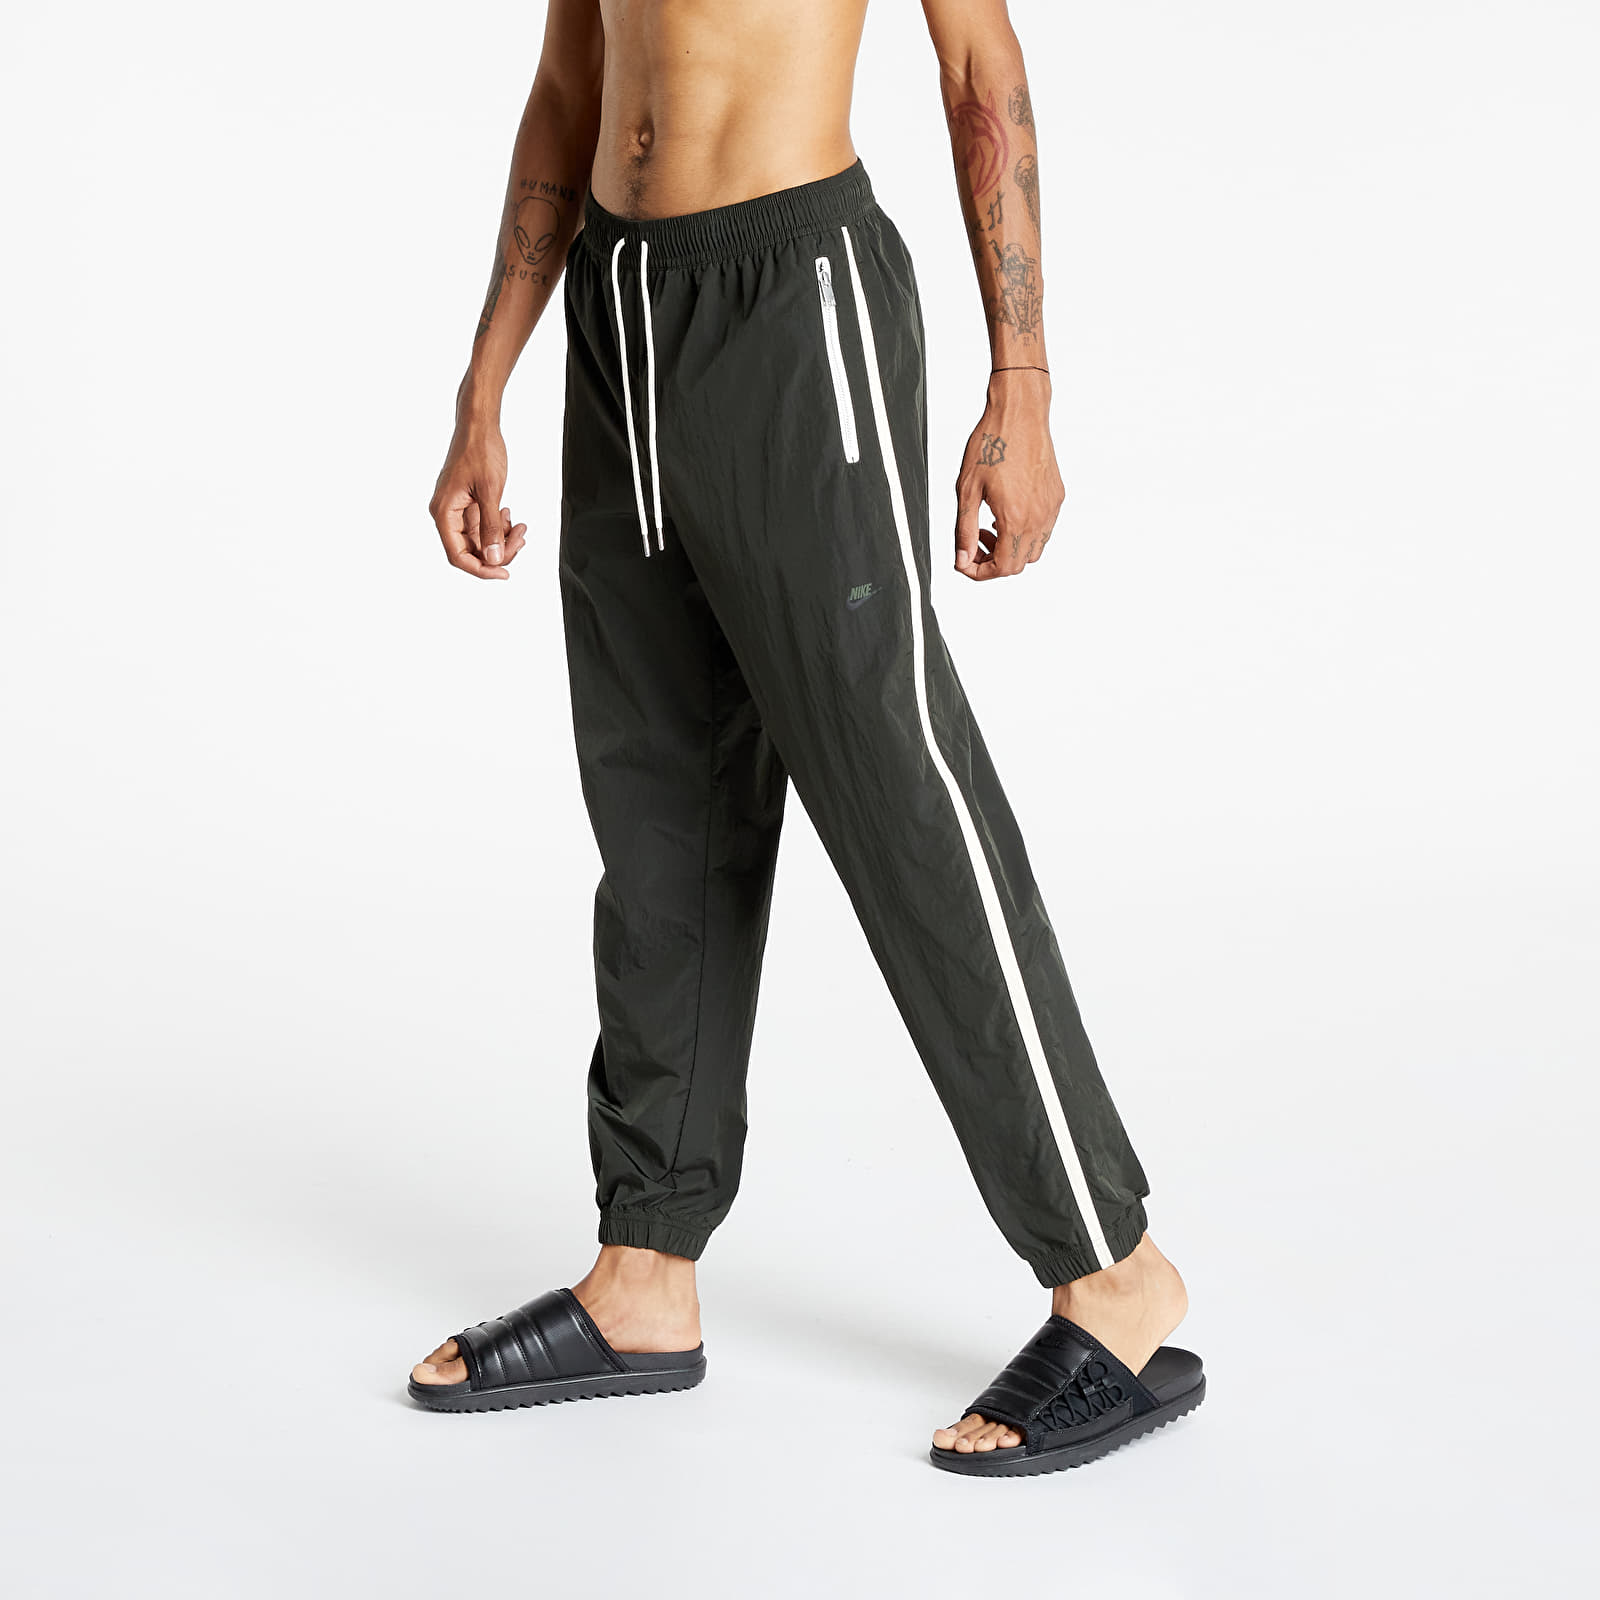 Džínsy a nohavice Nike Sportswear Style Essentials Men's Unlined Woven Track Pants Sequoia/ Sail/ Ice Silver/ Sequoia